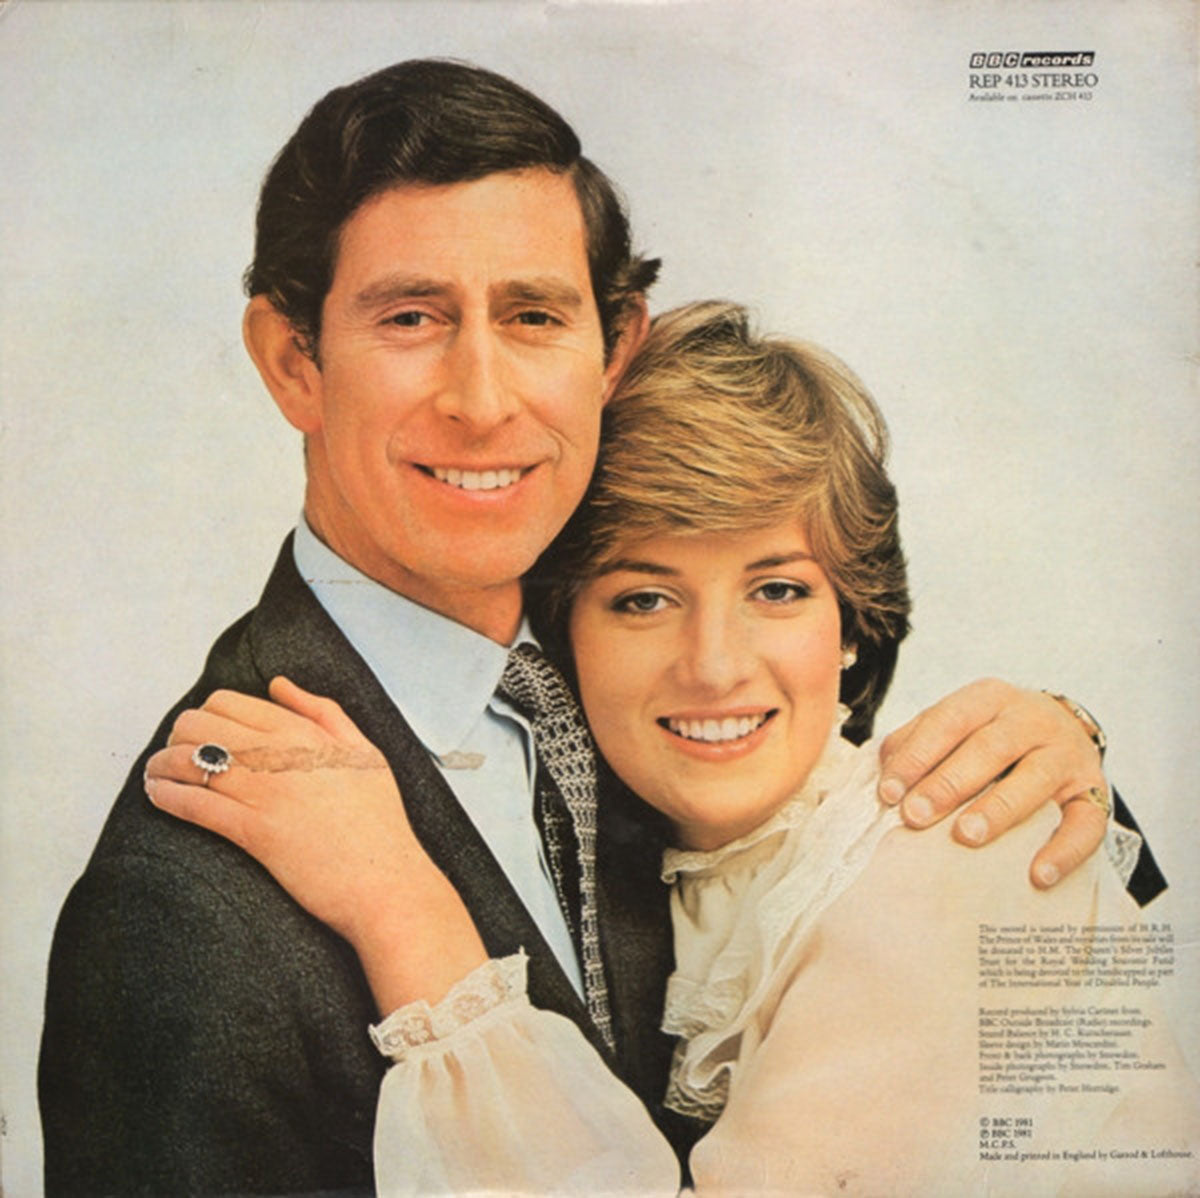 Royal Wedding - Prince Of Wales and Lady Diana Spencer - UK Pressing